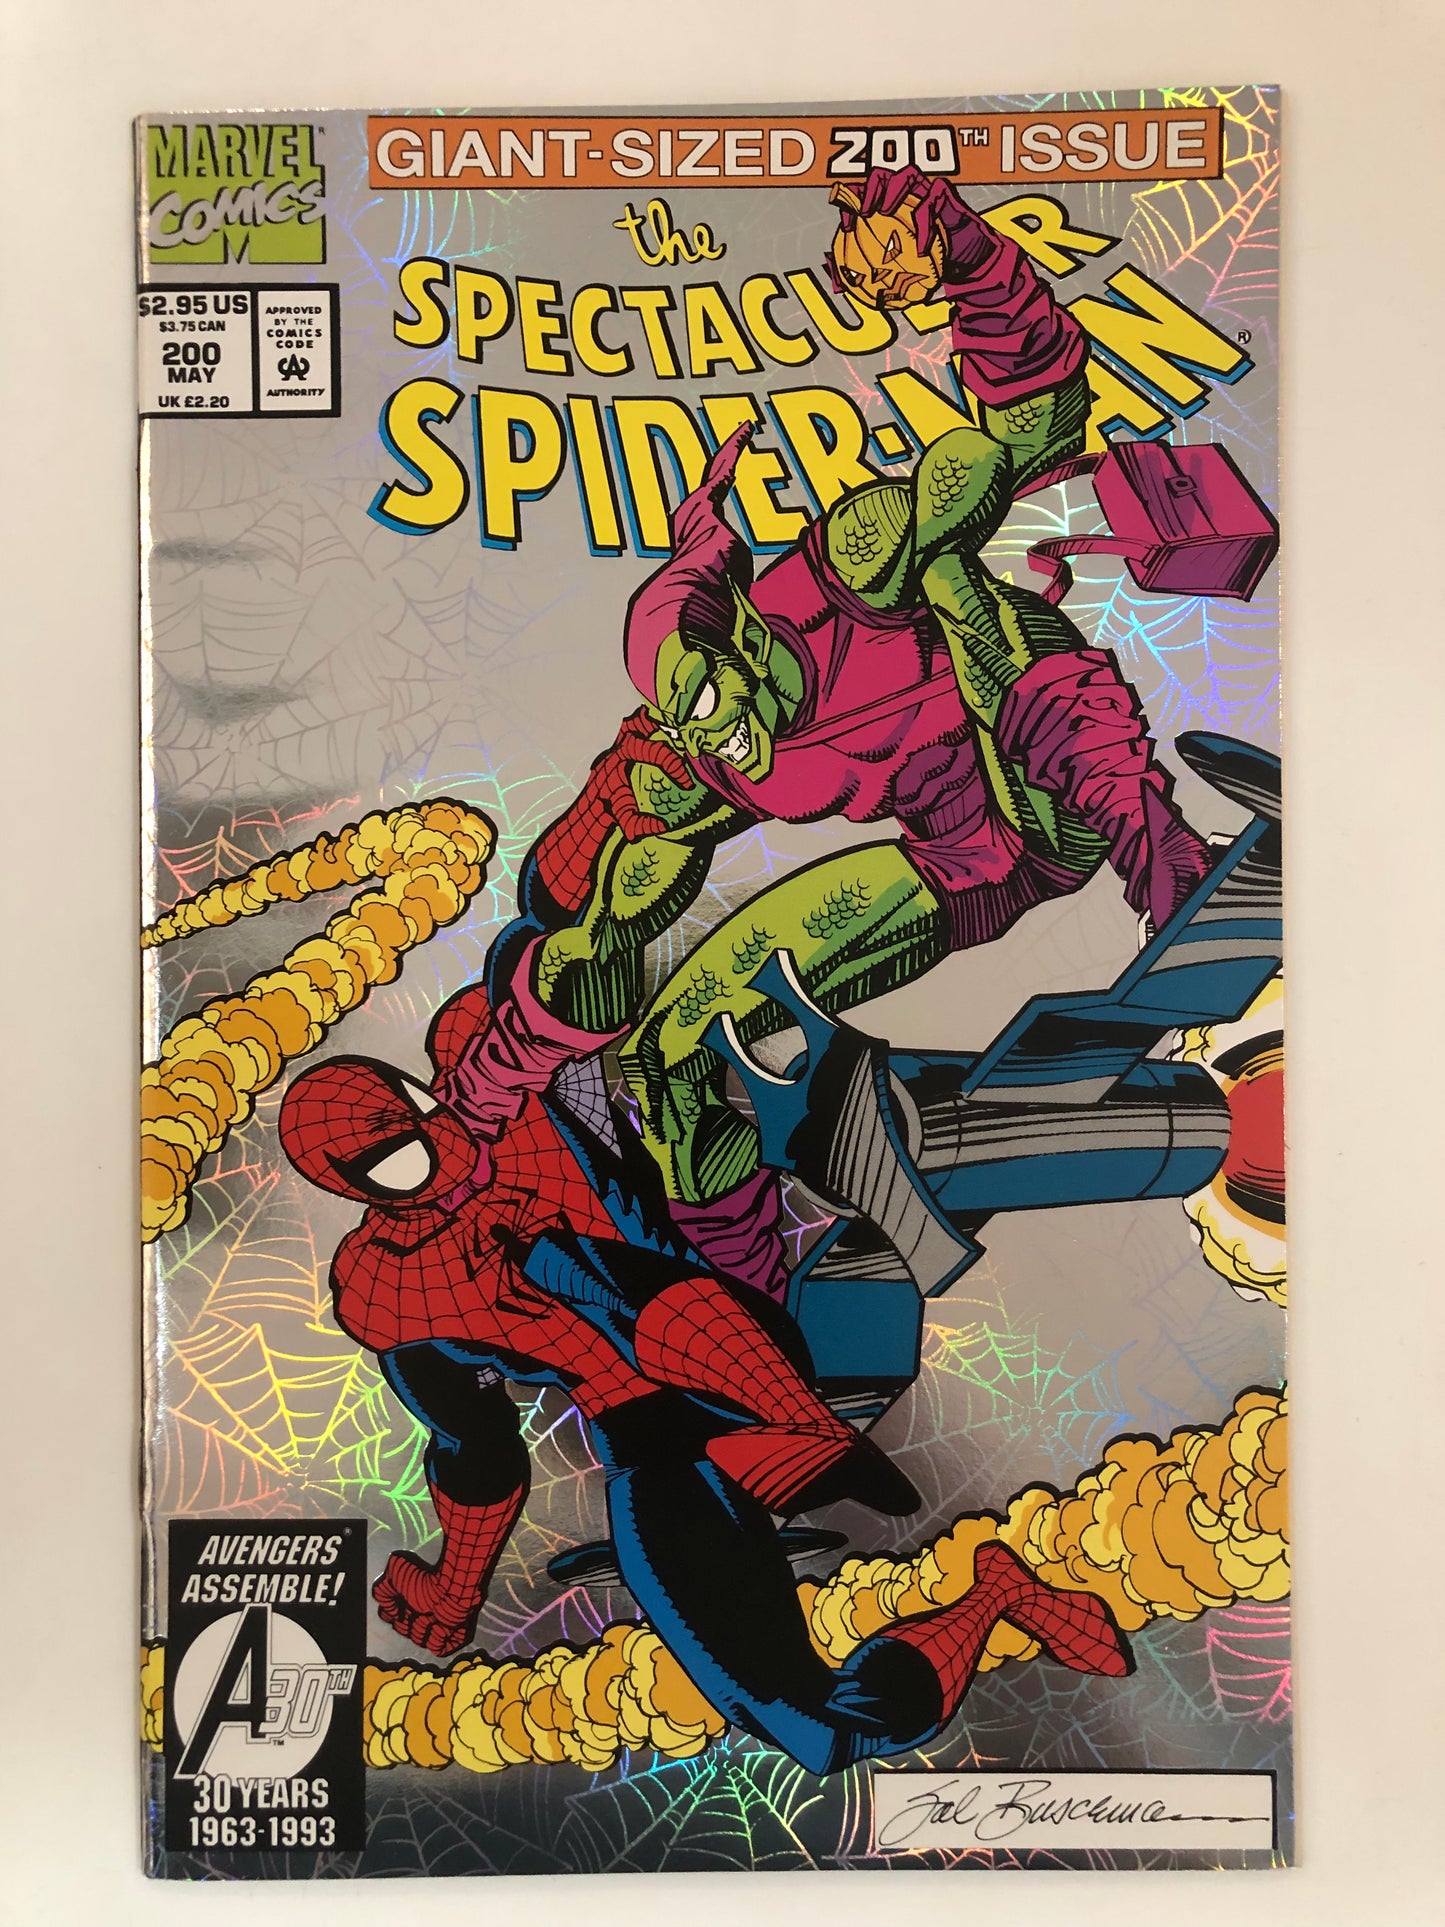 The Spectacular Spider-Man #200